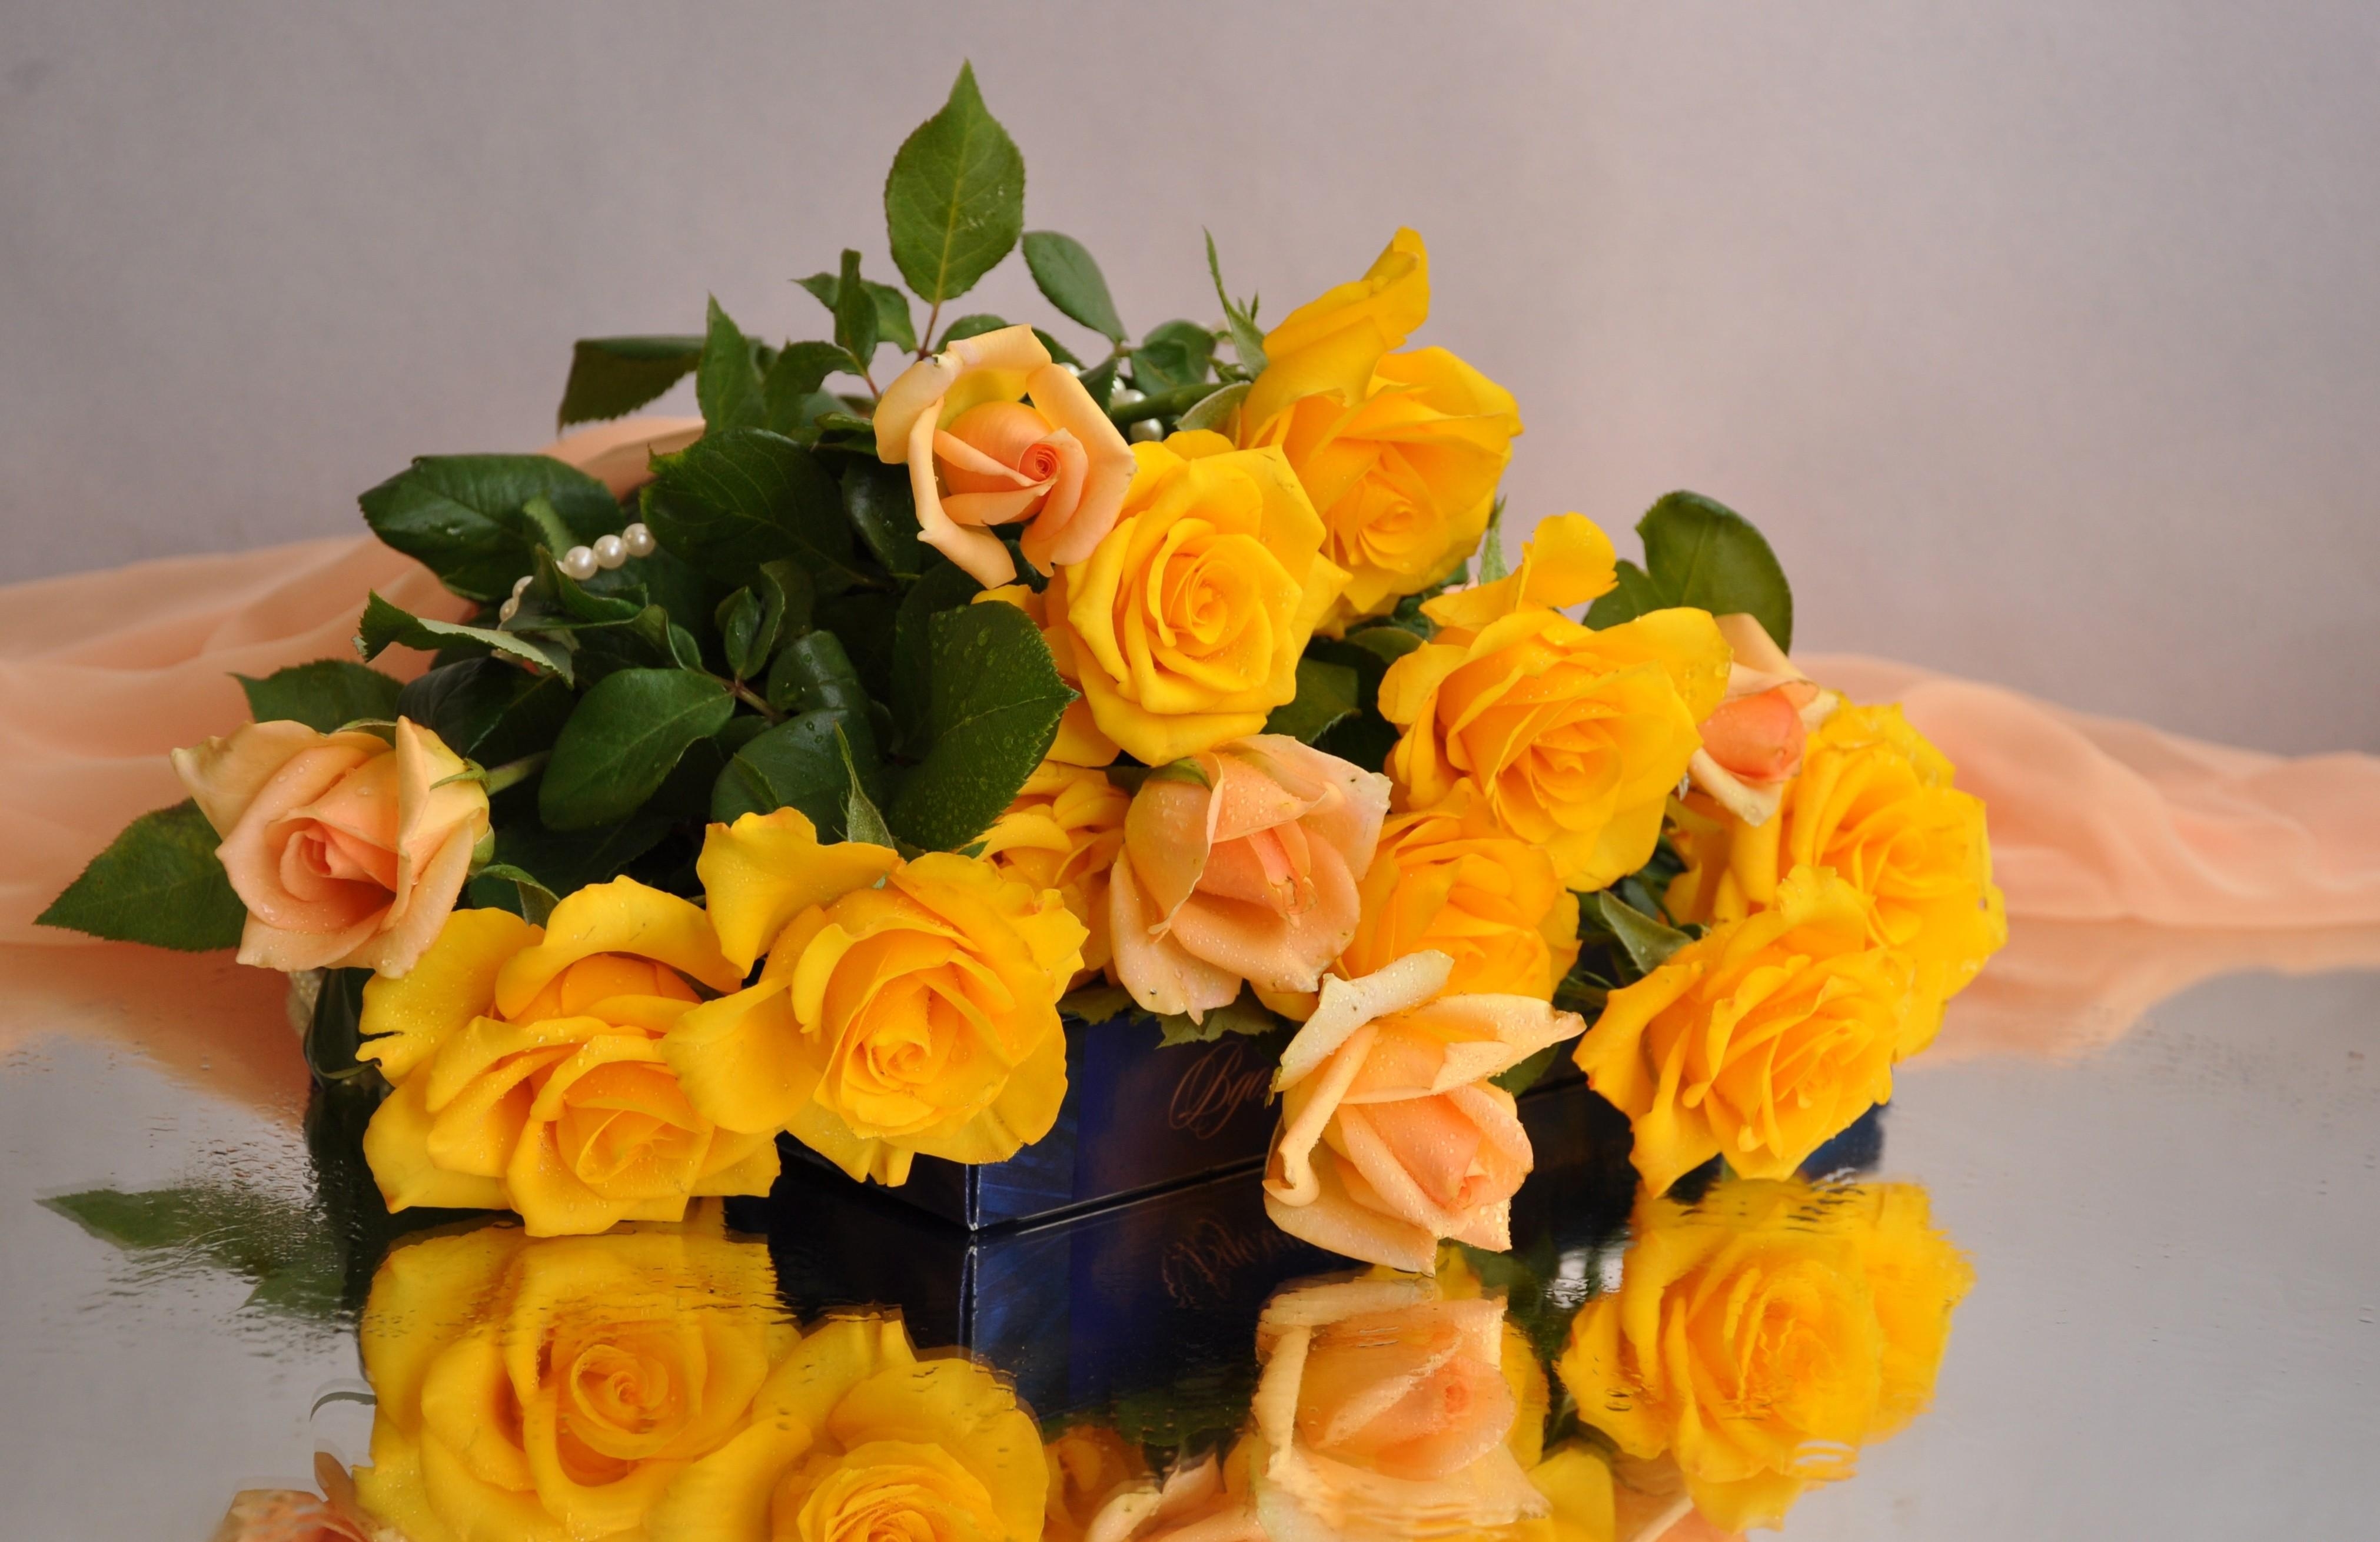 flowers, candies, roses, yellow, bouquet, cloth